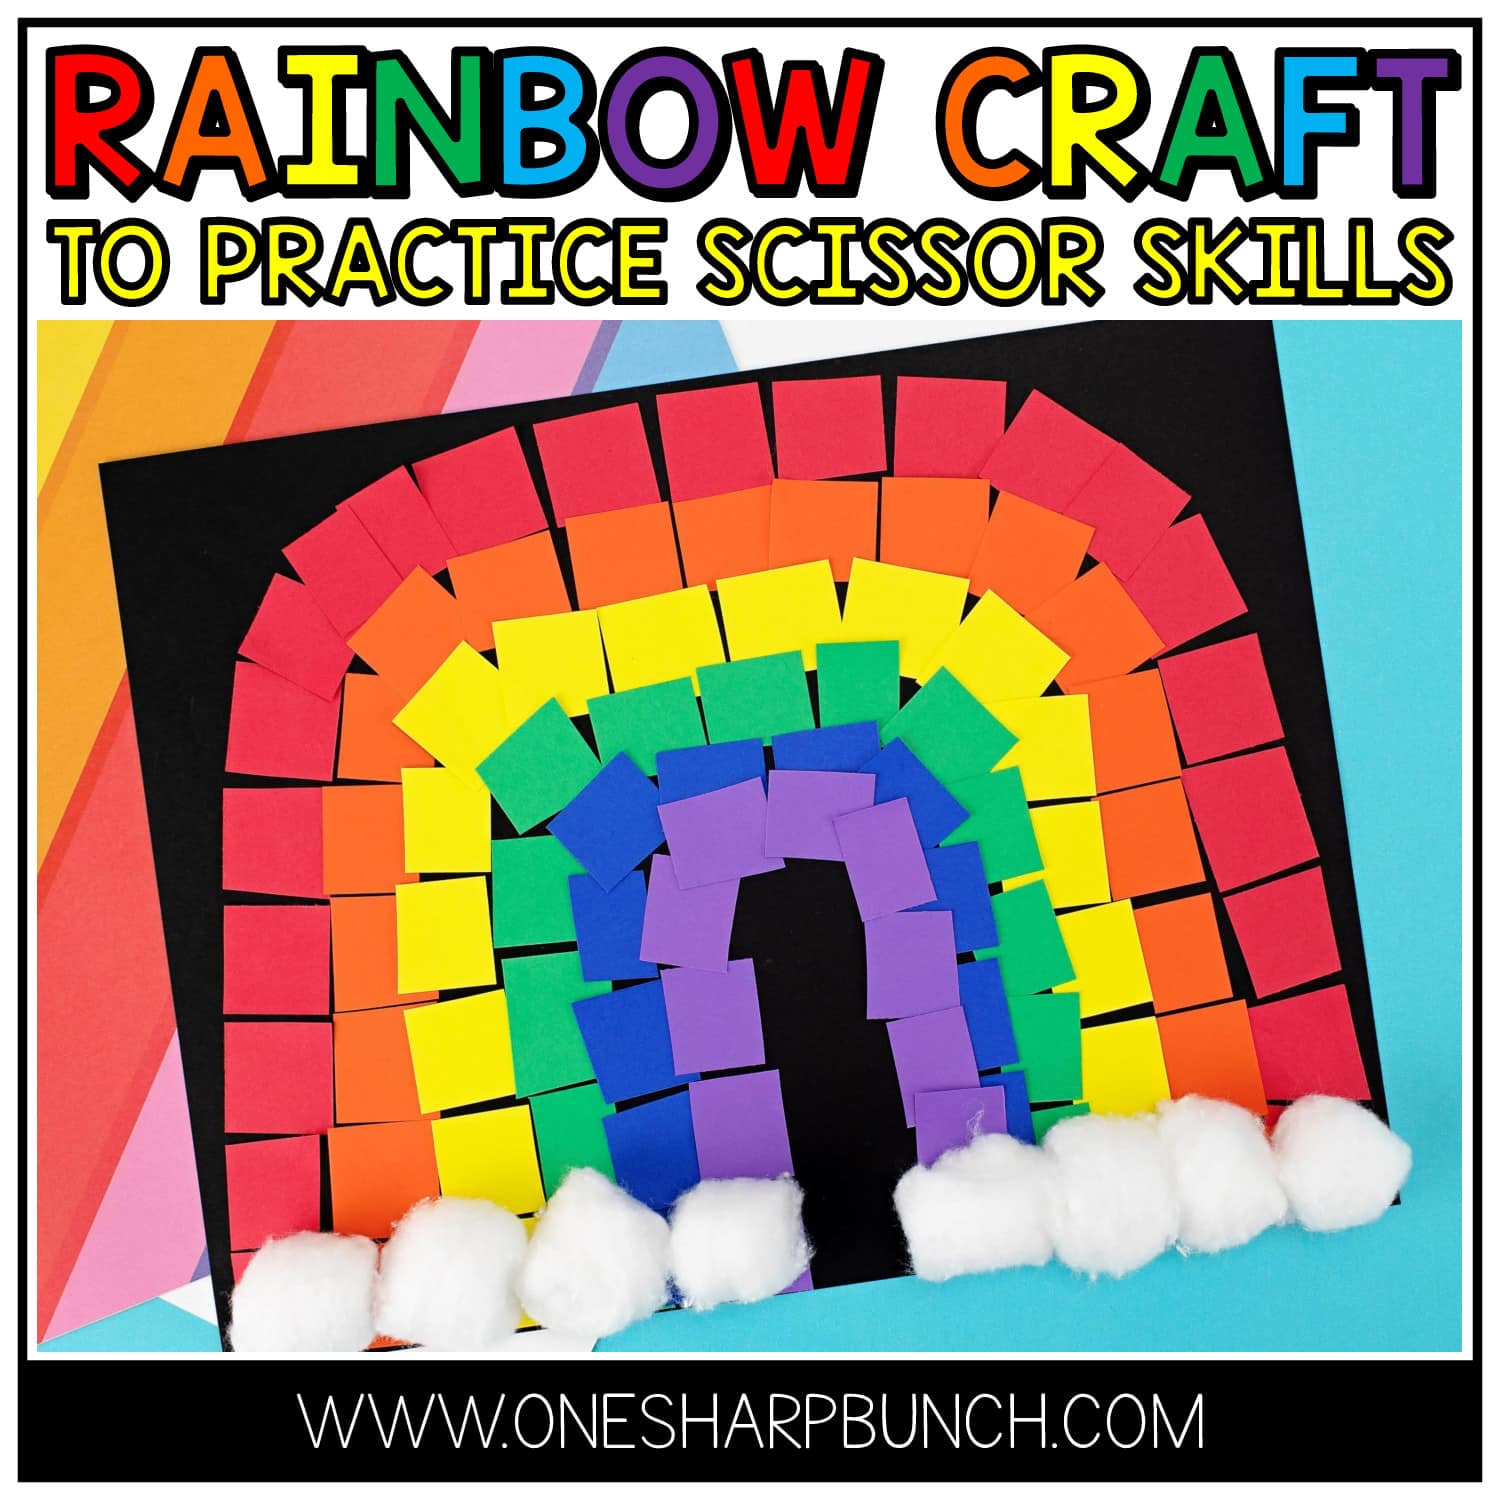 This is one of the best rainbow crafts for kids! It is fun, colorful and easy to make! Plus, your preschool and kindergarten students can practice their scissor skills and strengthen their fine motor skills as they snip each color into smaller pieces. It’s one of the perfect spring crafts for kids… especially as an addition to your St. Patrick’s Day crafts and St. Patrick’s Day activities!